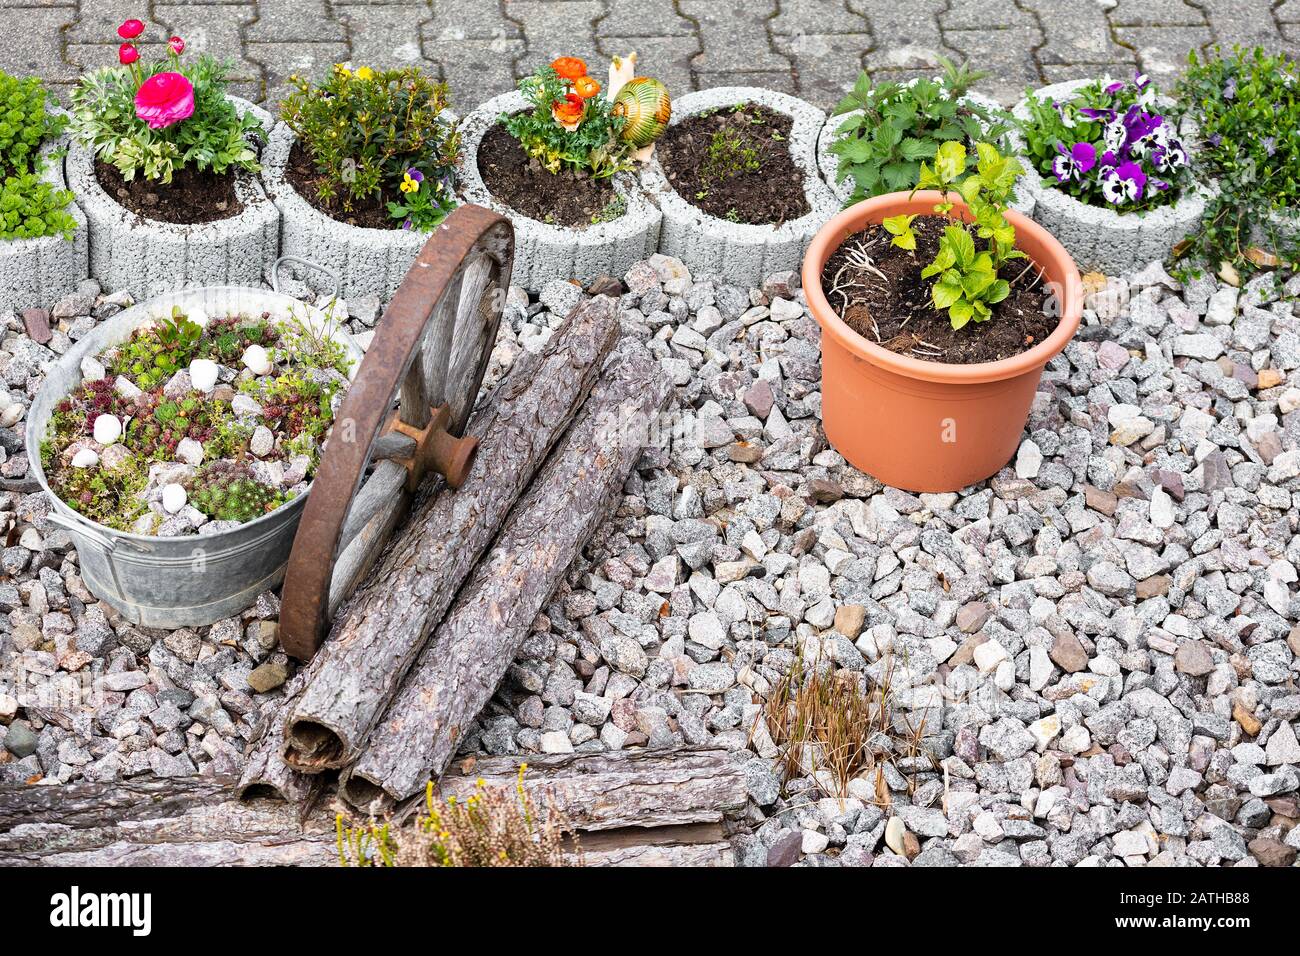 rockery garden with a lot of plants in plant pots Stock Photo